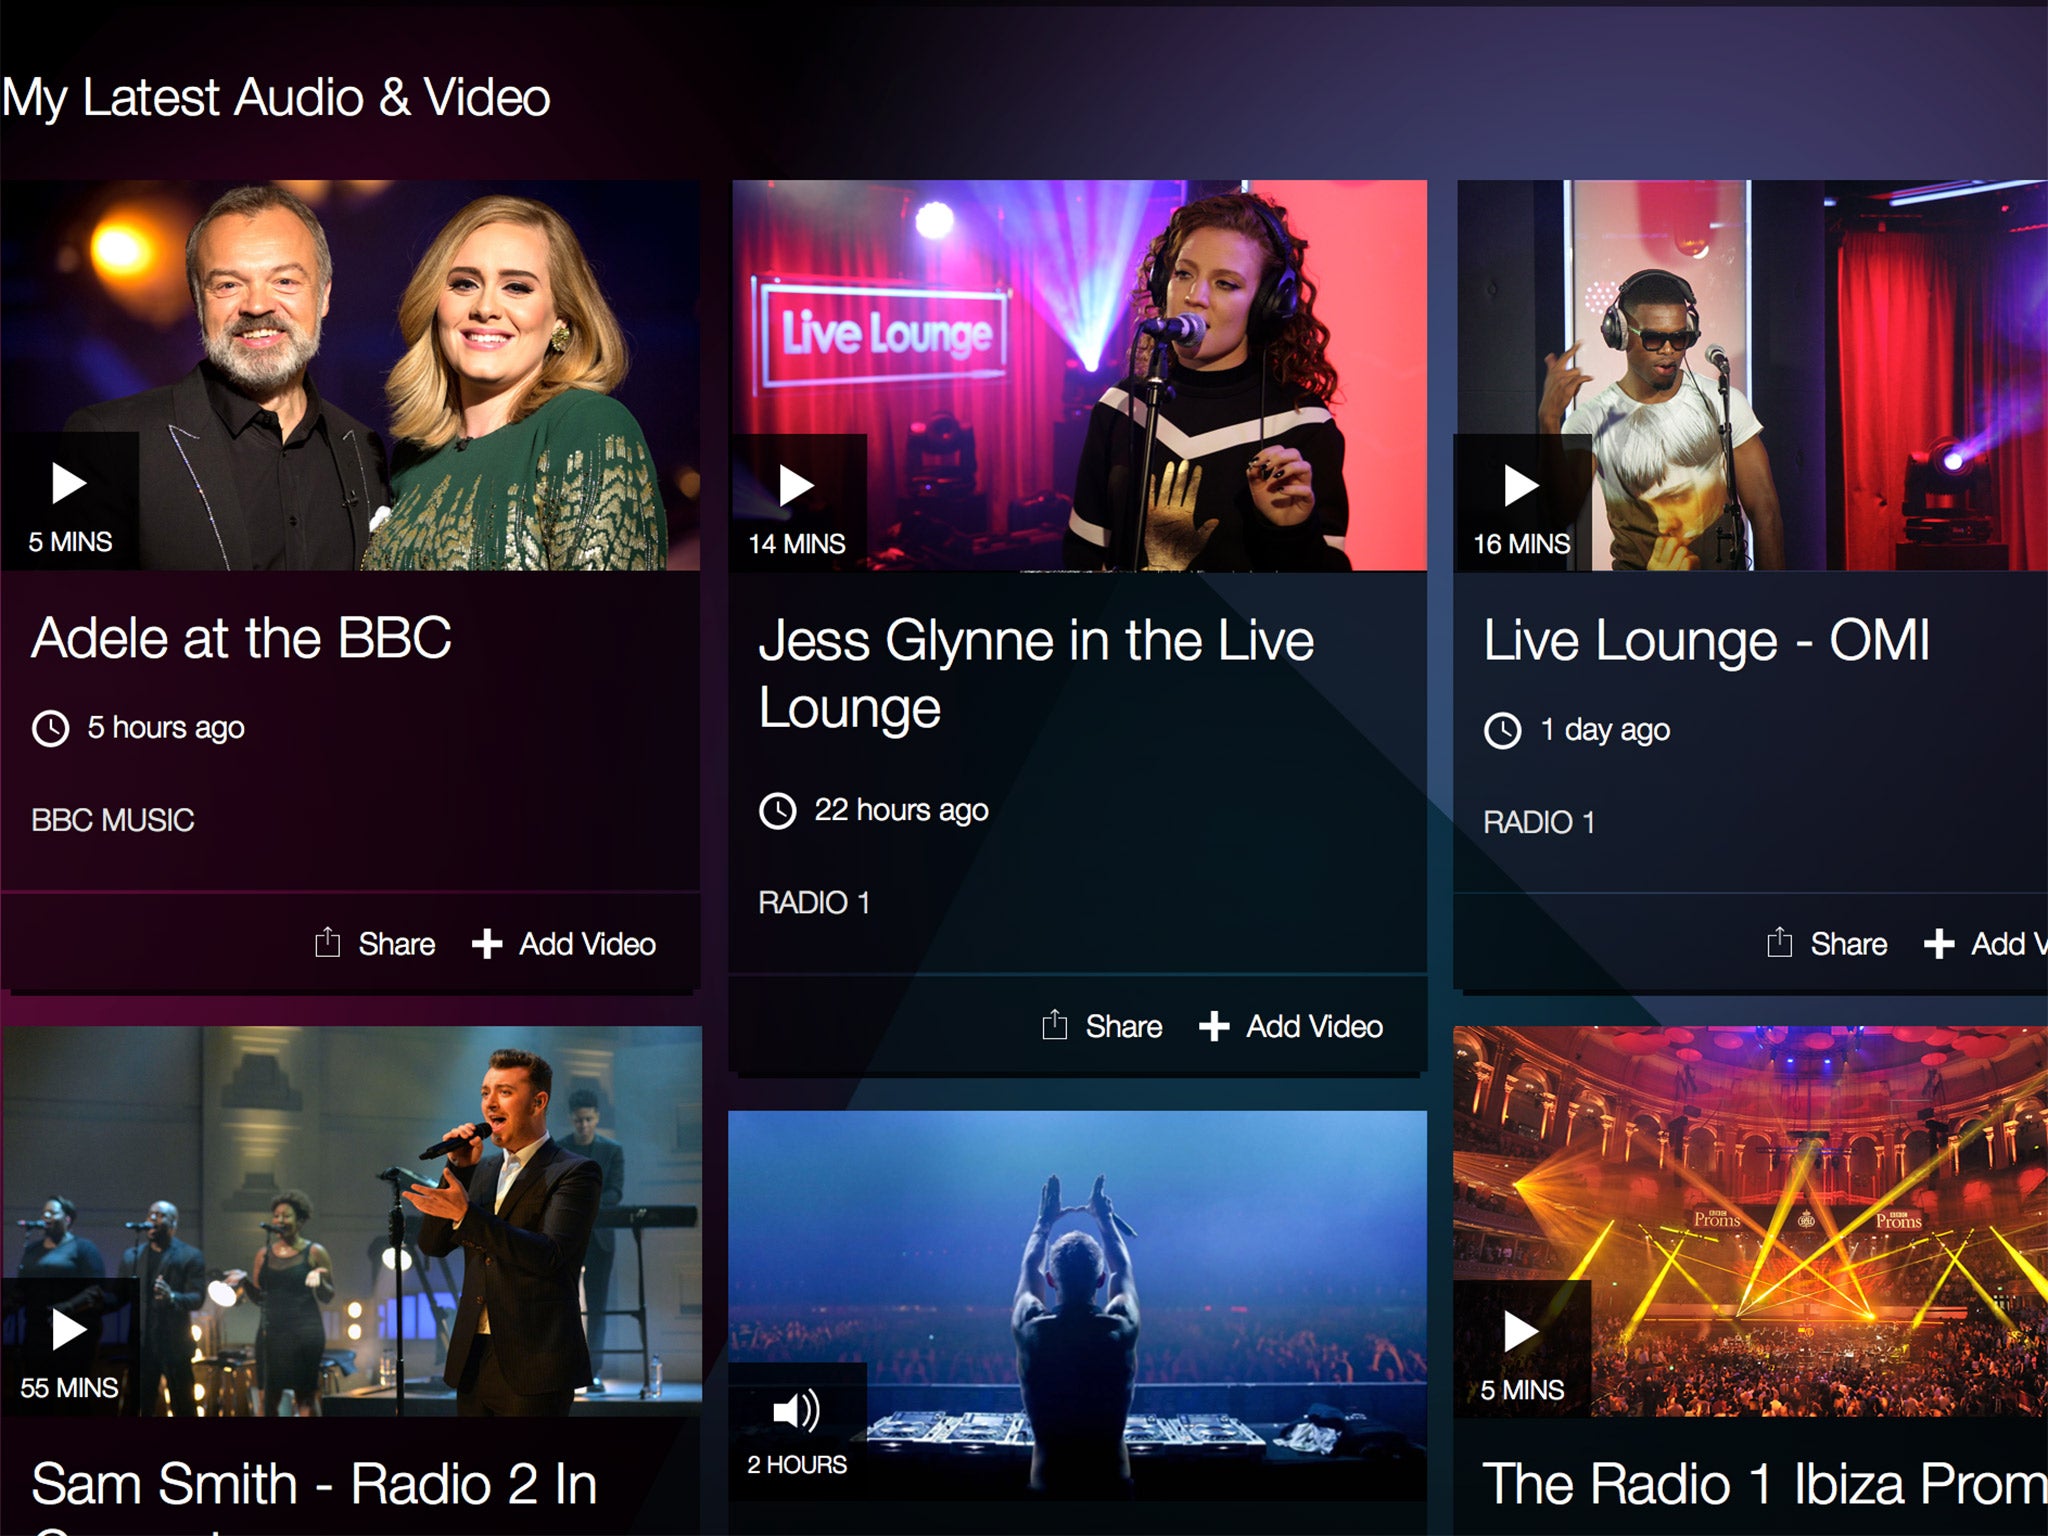 The new BBC Music app's user interface